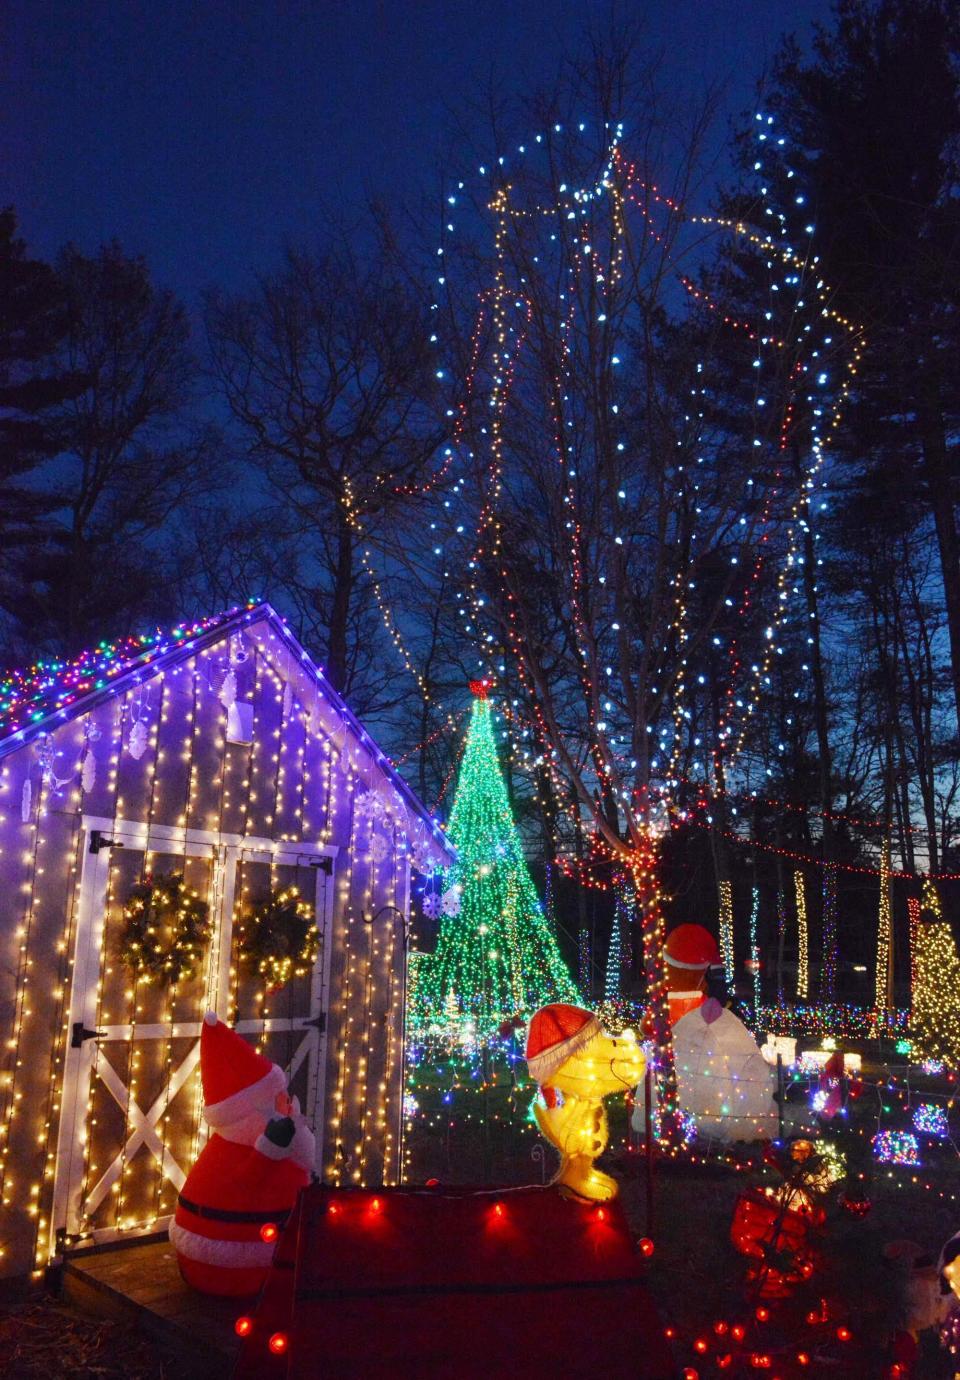 Some of the 160,000 Christmas light display at Dan Amarante's Winter Wonderland at Pratt Road home off Route 101 in Dayville in November 2017. The home was featured on the ABC program "The Great Christmas Light Fight." [John Shishmanian/ NorwichBulletin.com]